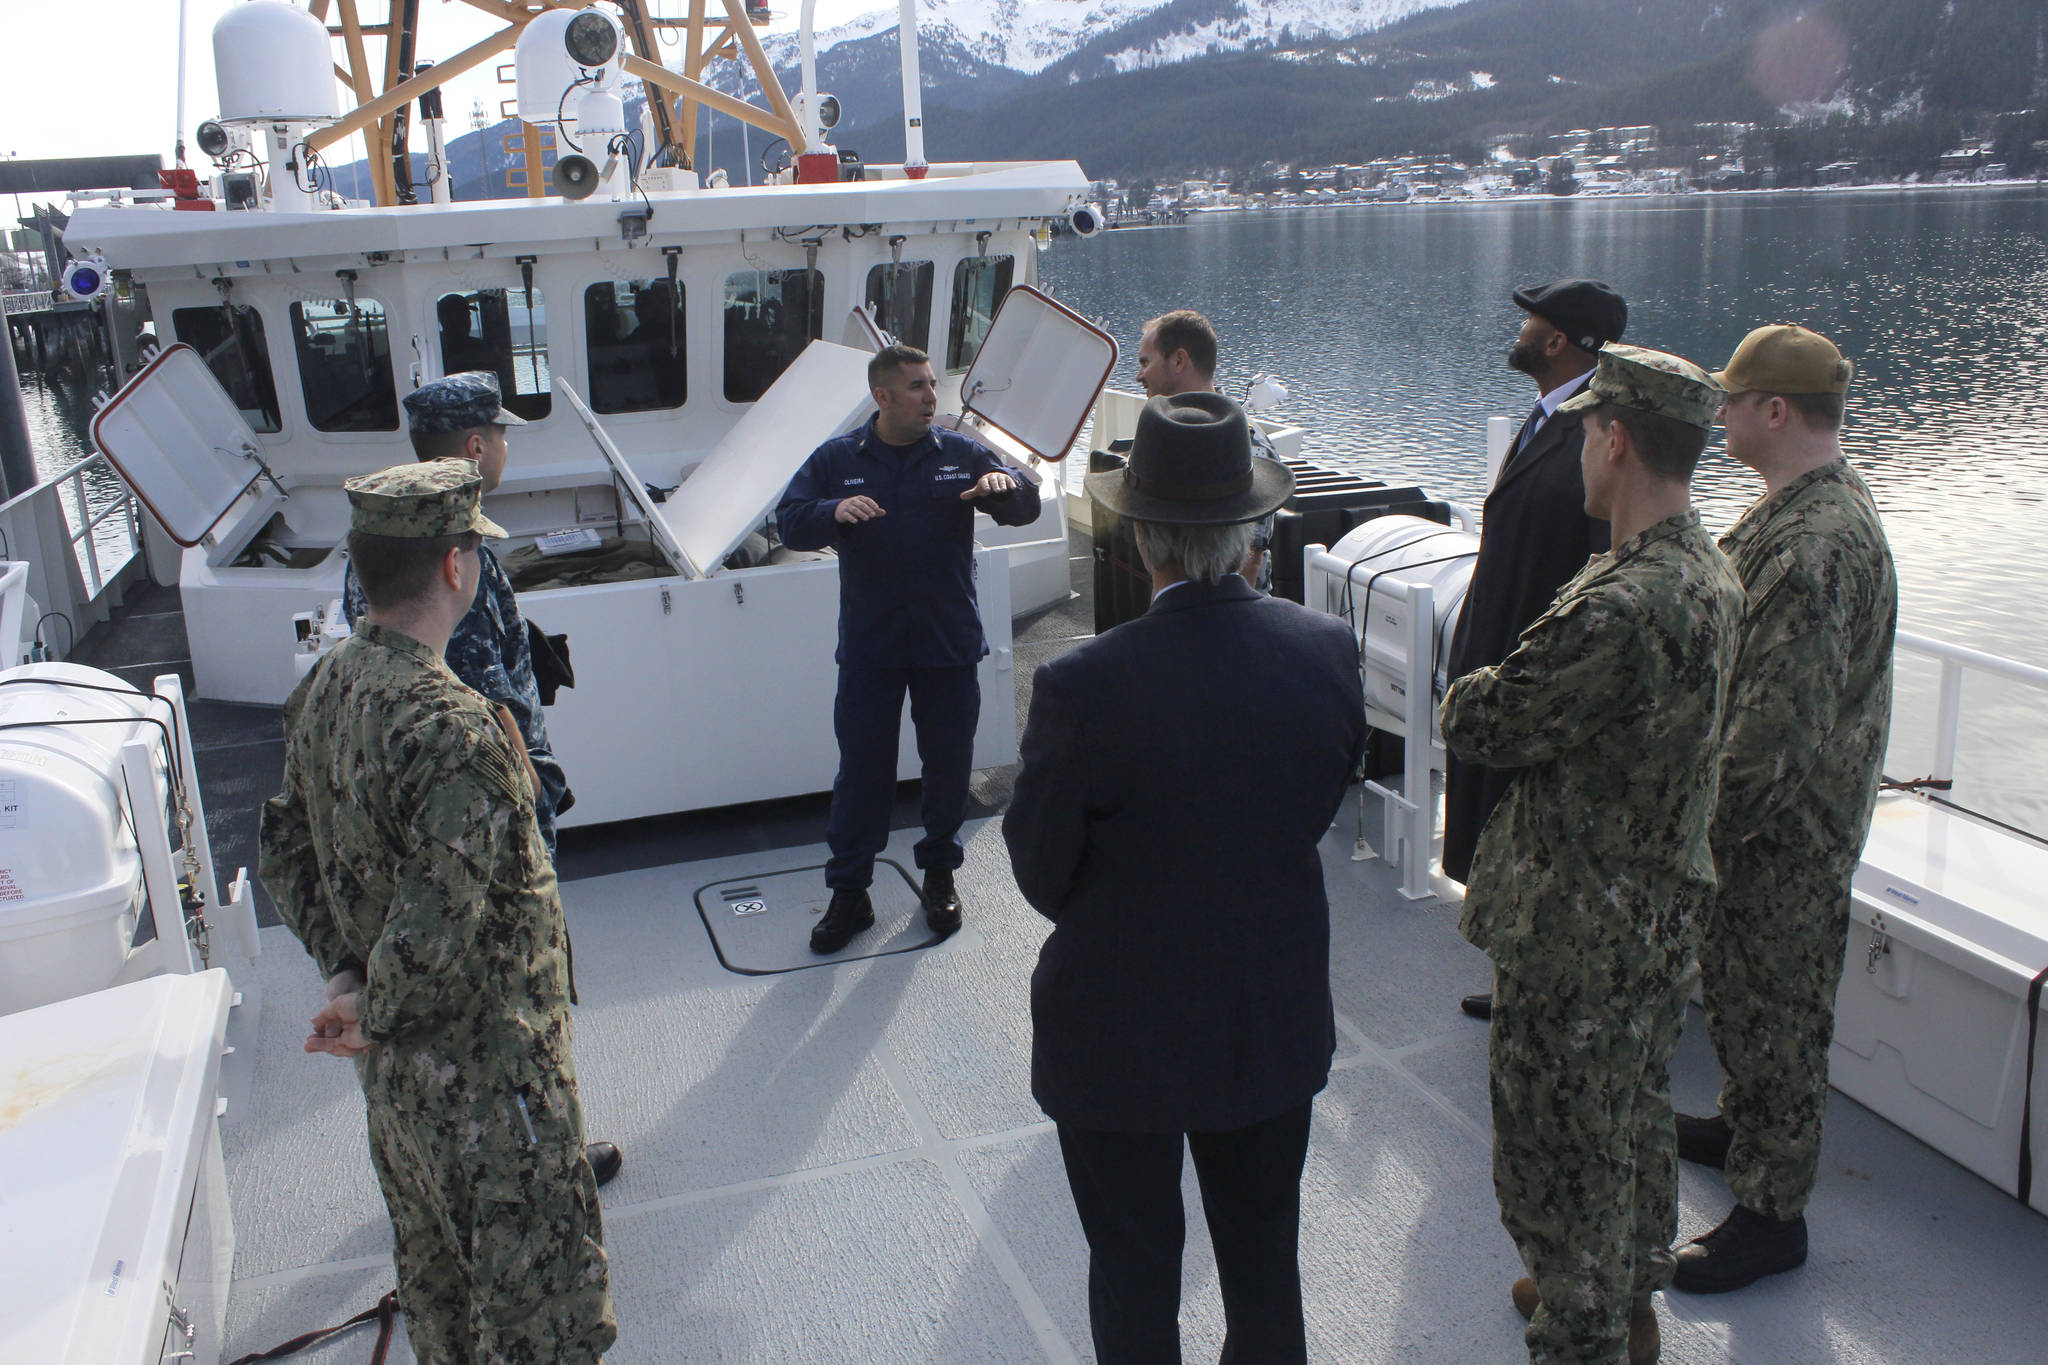 Chief Boatswains Mate Matt Oliveira speaks to representatives from the U.S. Navy on March 13, 2018 on the deck of the U.S. Coast Guard Cutter John McCormick. (Alex McCarthy | Juneau Empire)